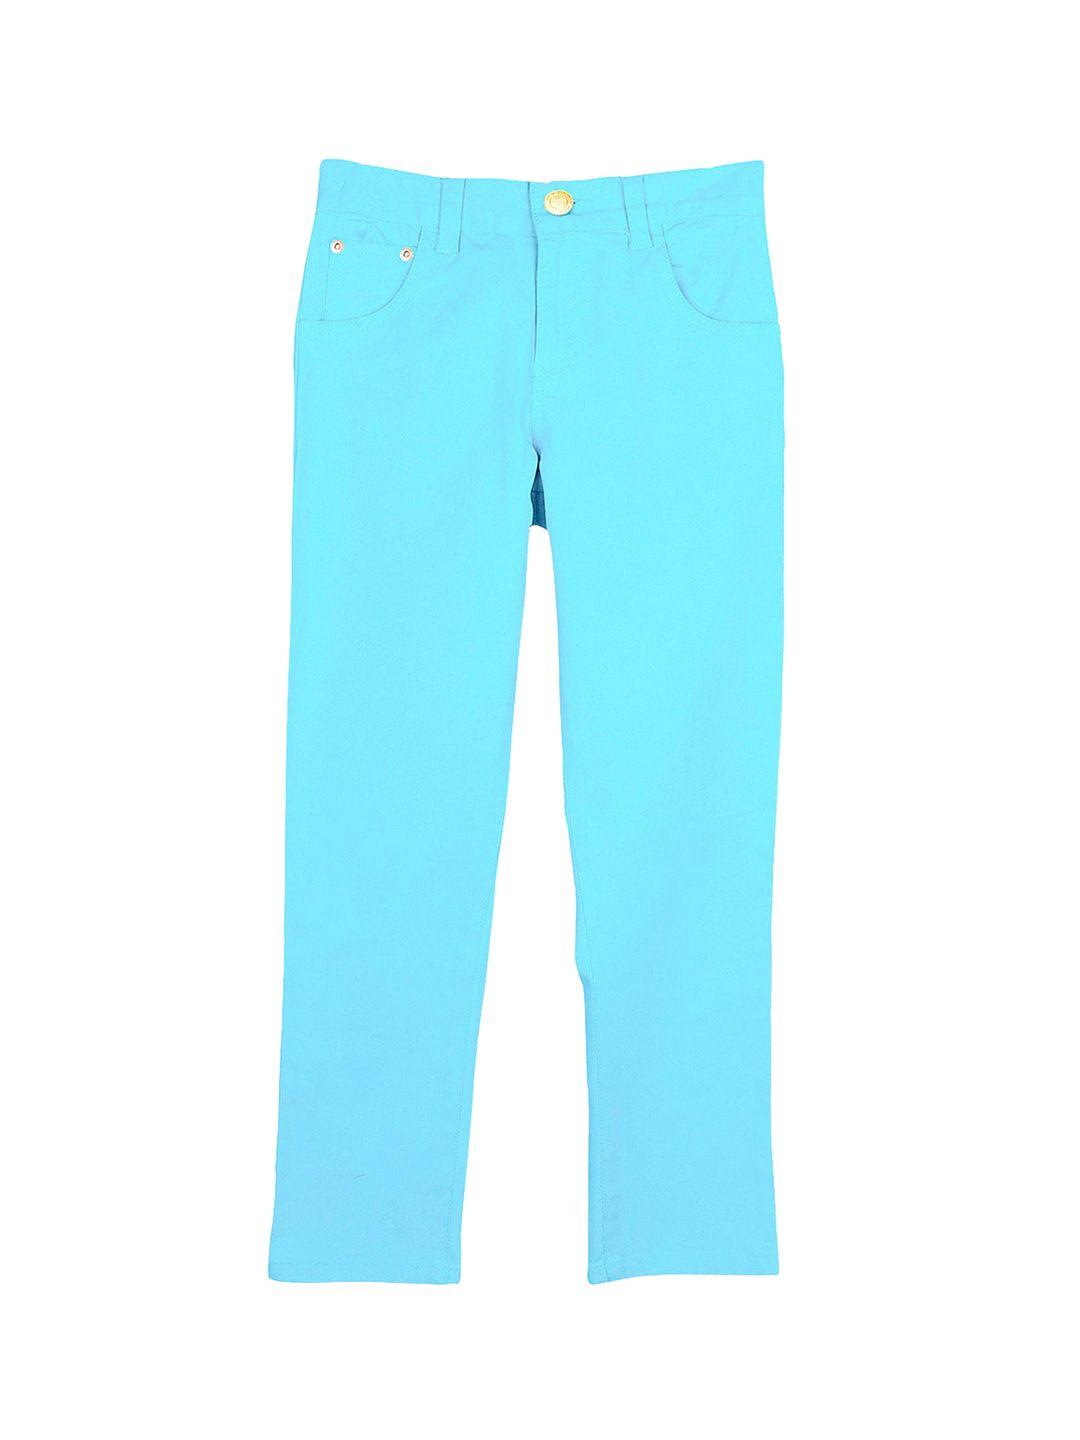 cherry crumble boys and girls blue solid cotton twill sky blue jeans